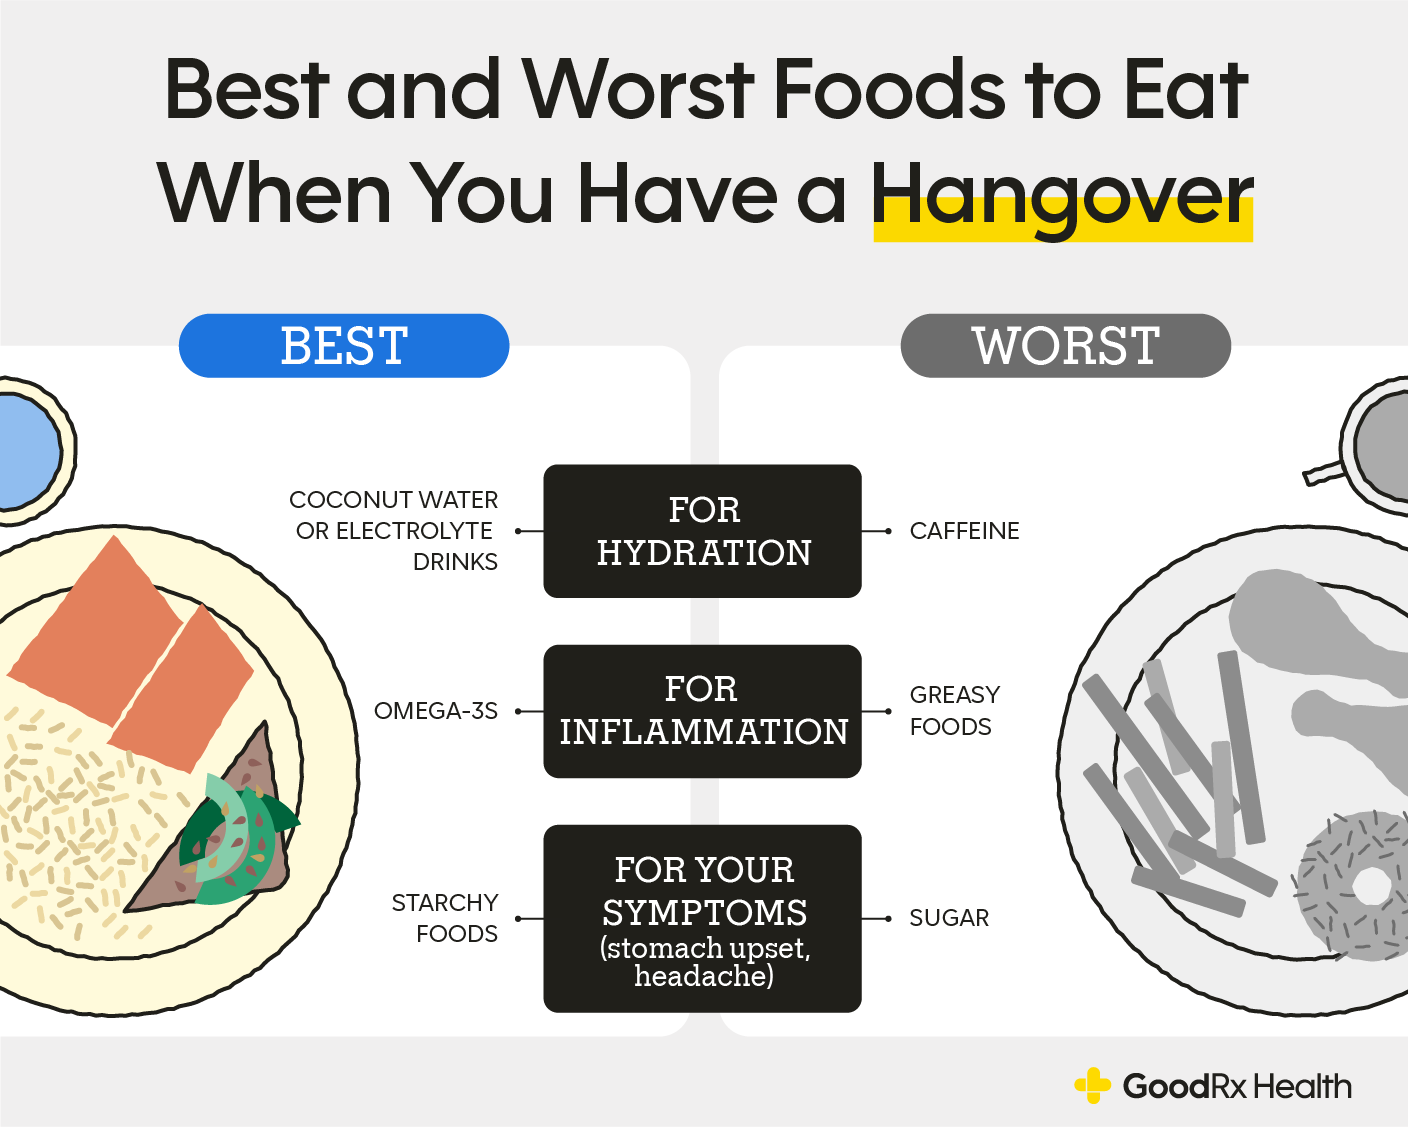 How to Avoid a Hangover